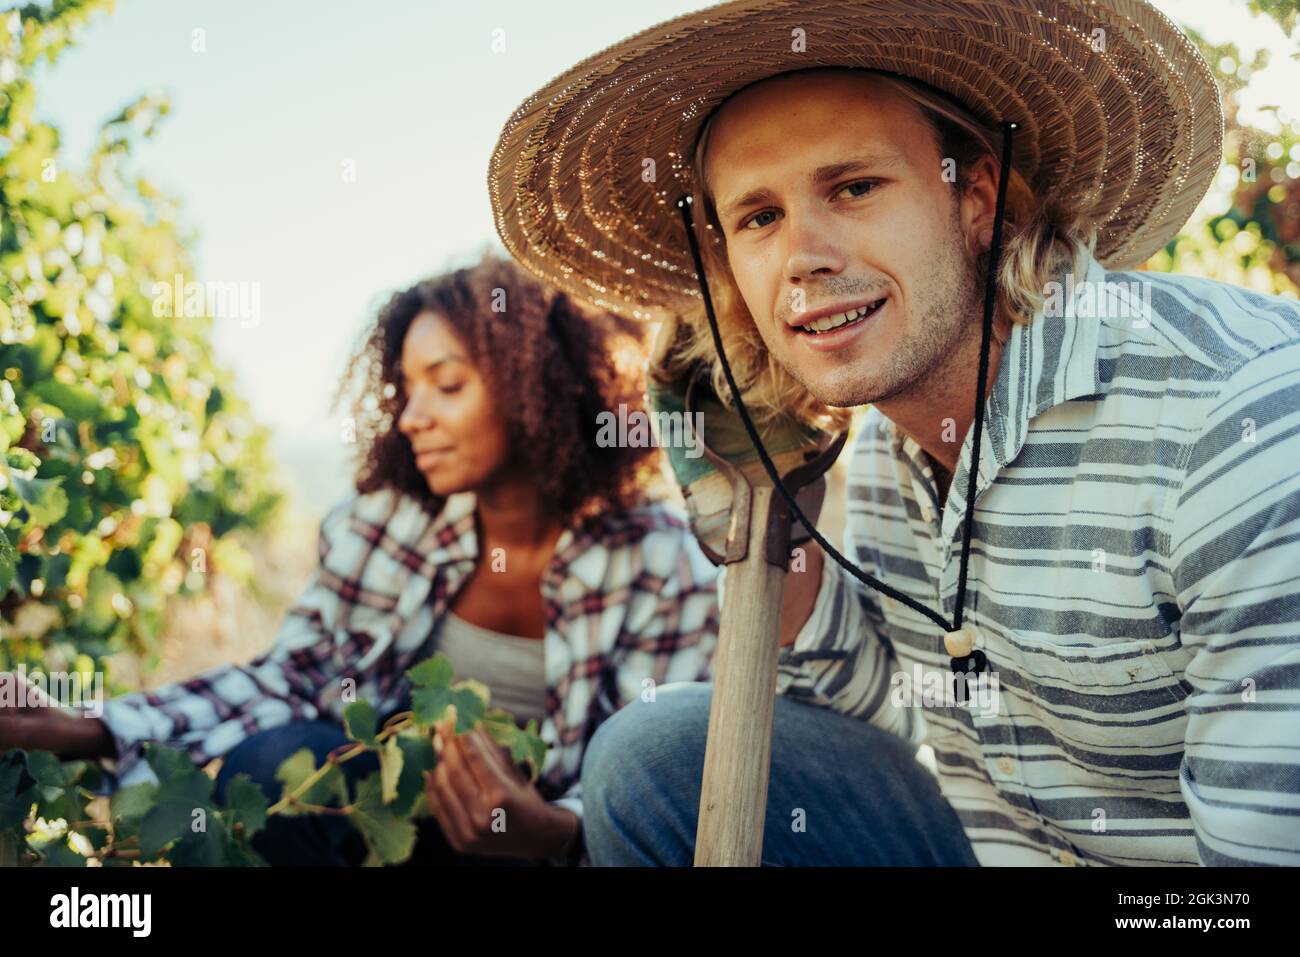 Male and female farmers working in vineyards harvesting crops at sunrise Stock Photo